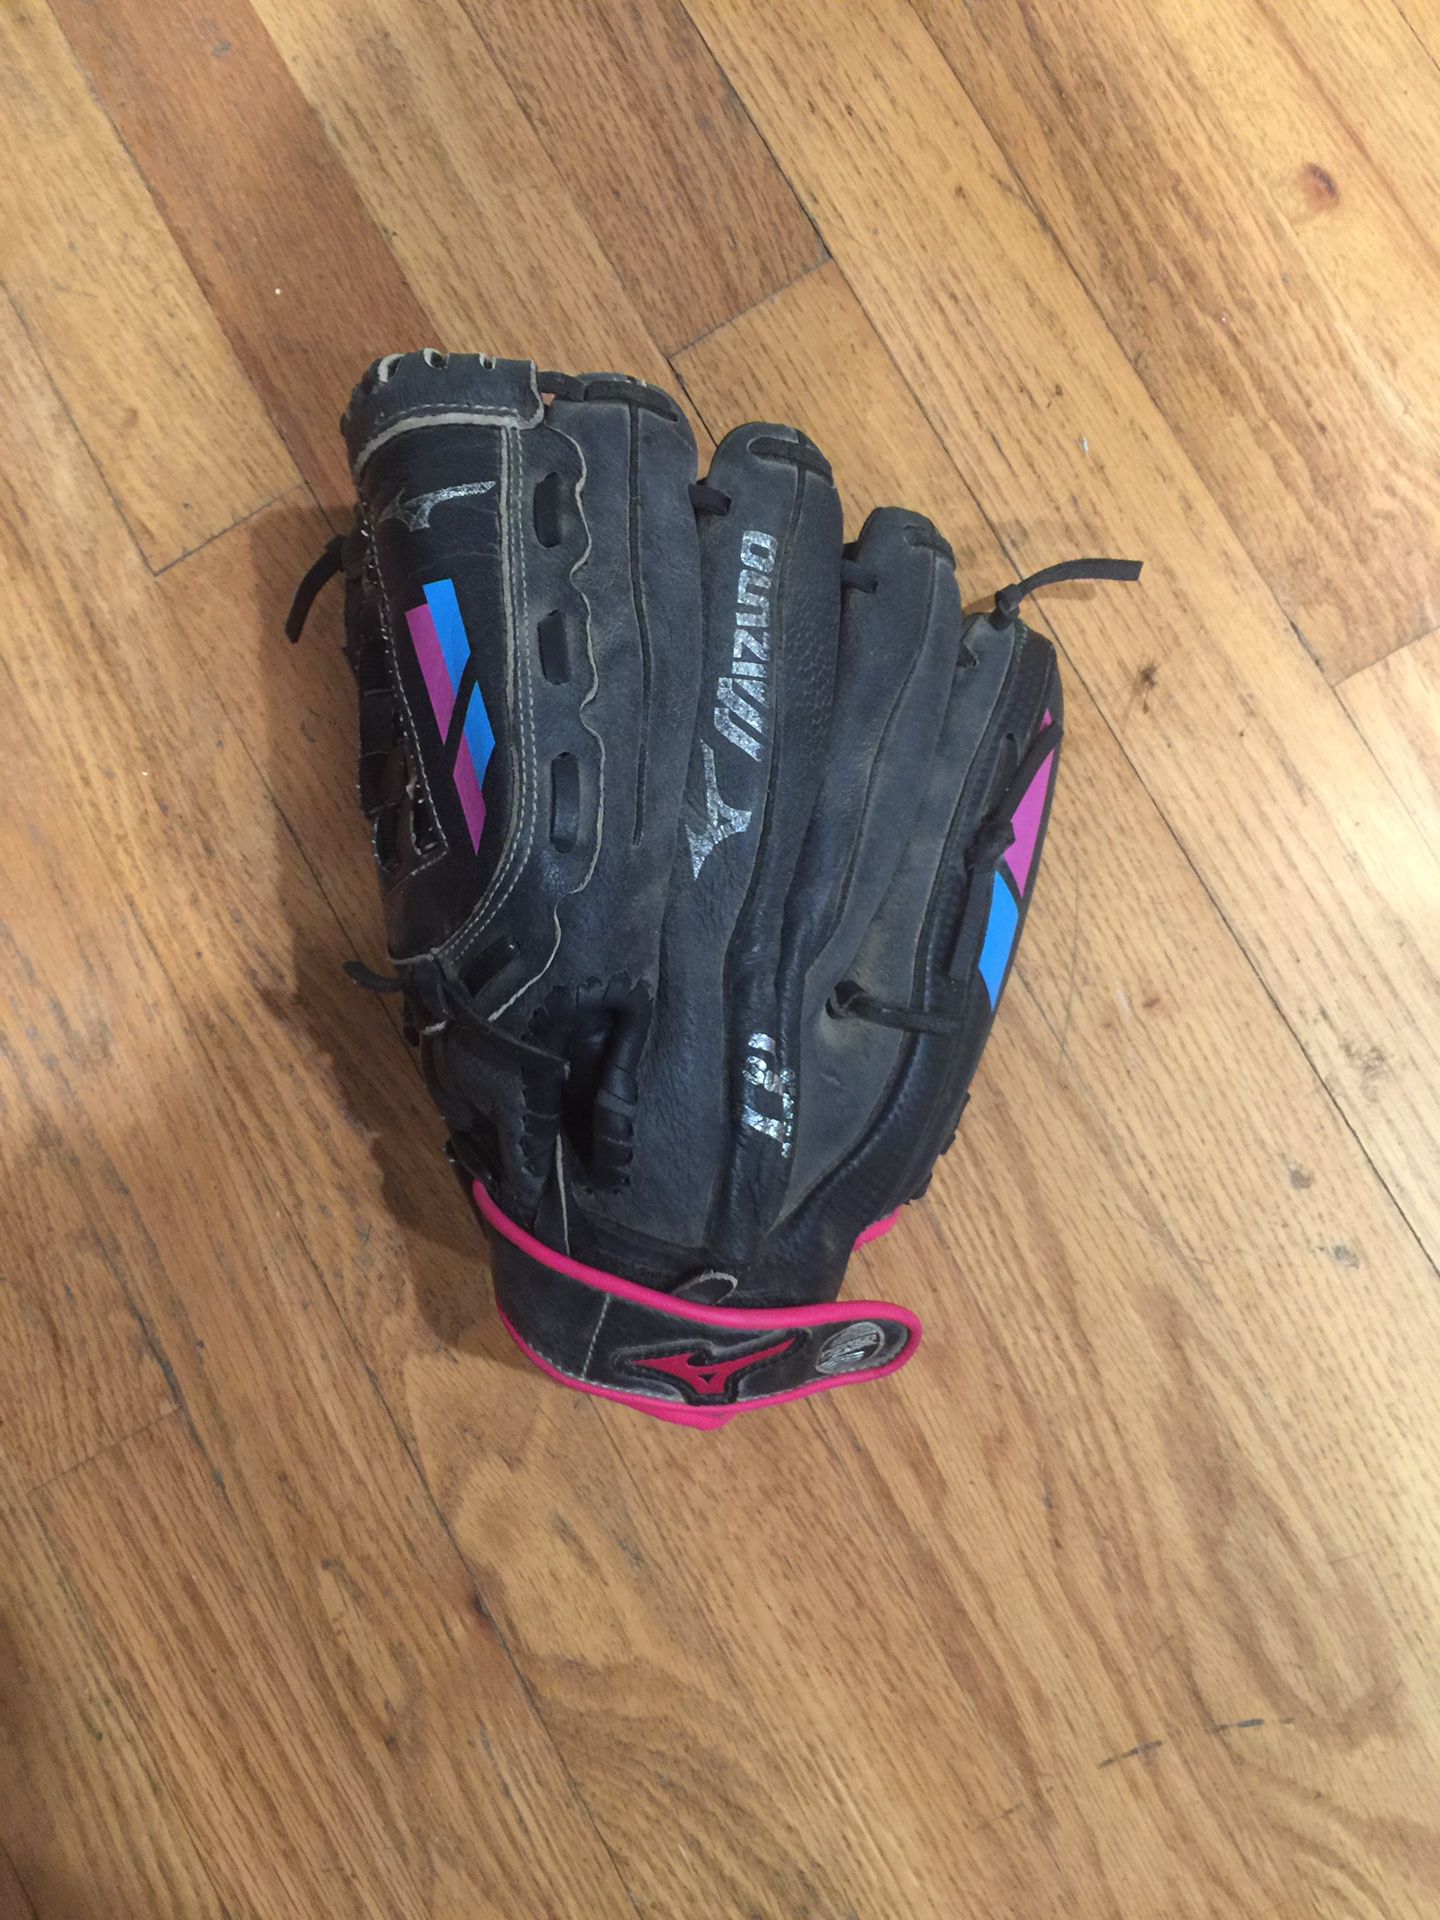 Fast pitch softball glove for left handed player 11.5 inch